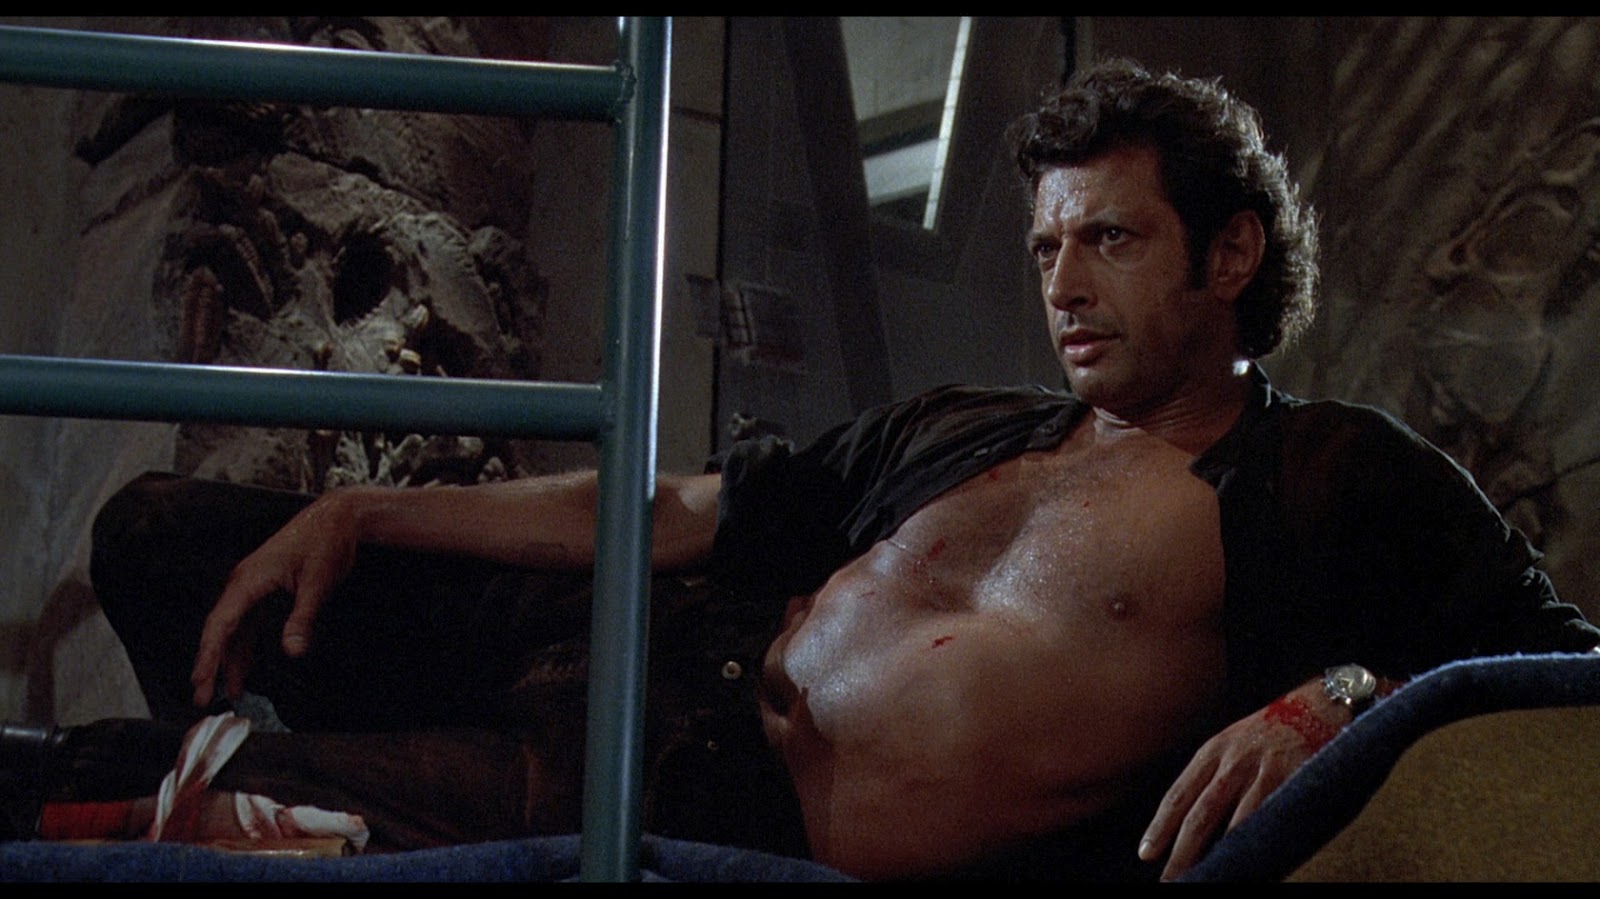 Sexy Silver Haired Jeff Goldblum Recreates Iconic Shot from 'Jurassic Park'  Nearly 30 Years Later - Bloody Disgusting